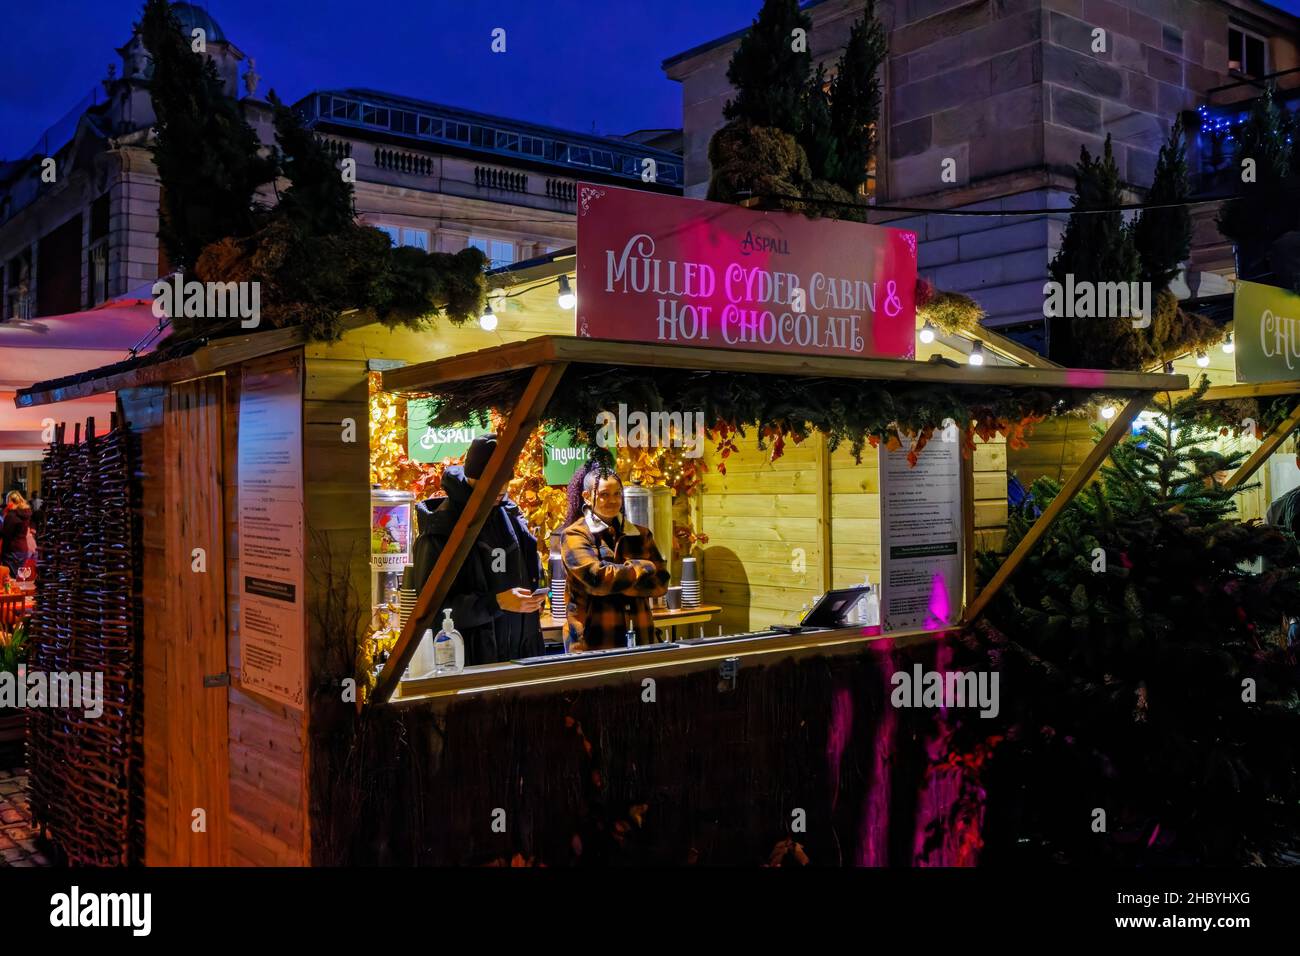 Stall selling hot drinks at the winter market in Covent Garden, London WC2 in the evening: 'Mulled Cyder Cabin & Hot Chocolate' Stock Photo